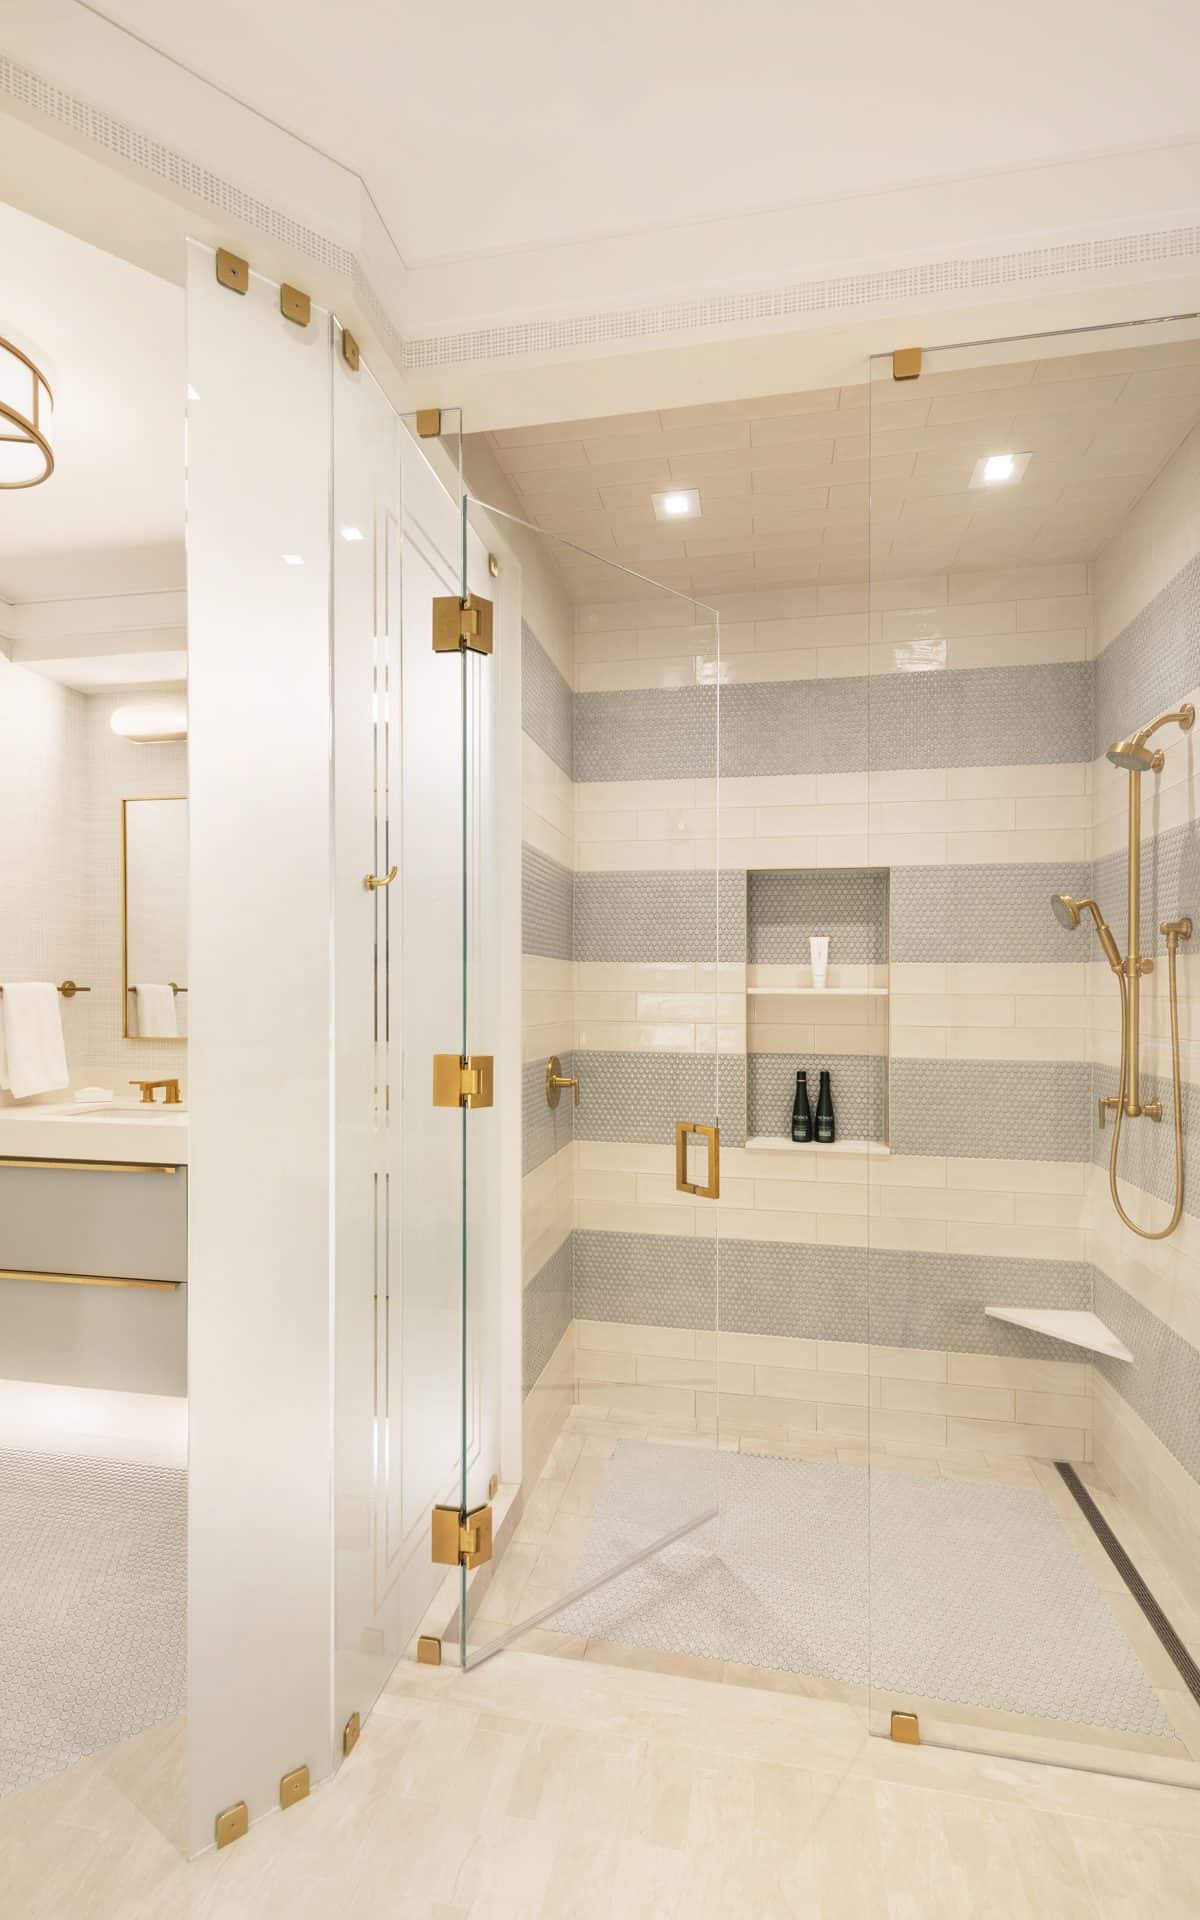 Luxury bathroom features modern design with high-end tiles, gold accents, and large shower with glass doors.